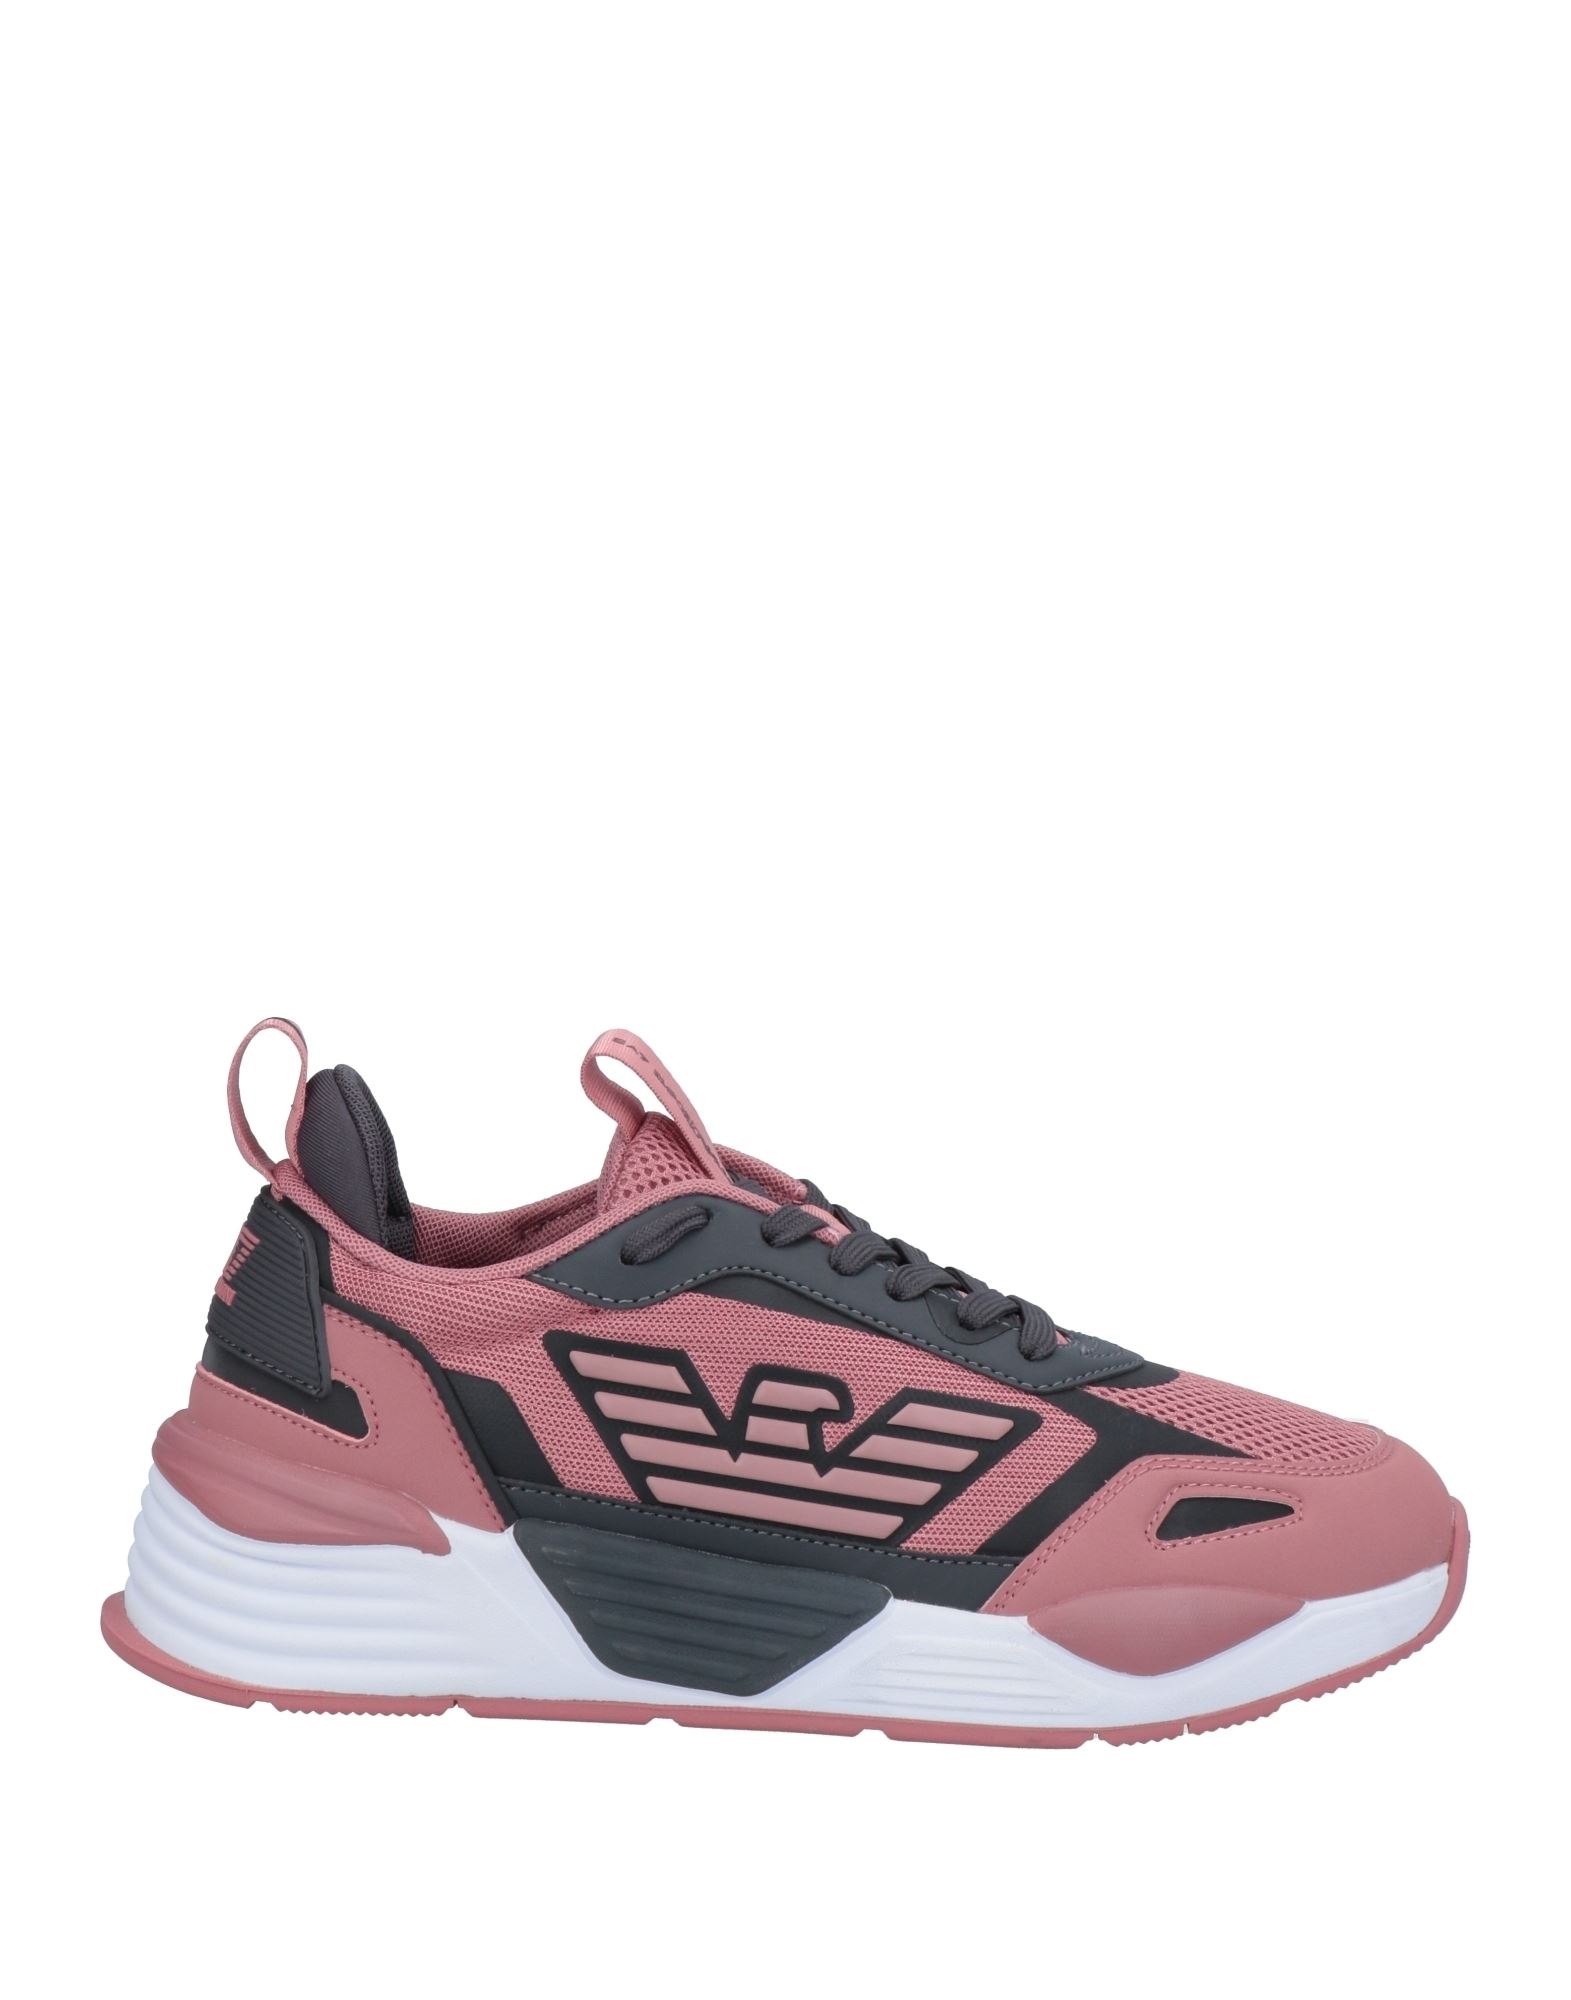 Ea7 Mens Trainers- X8x070xk165 In Pastel Pink